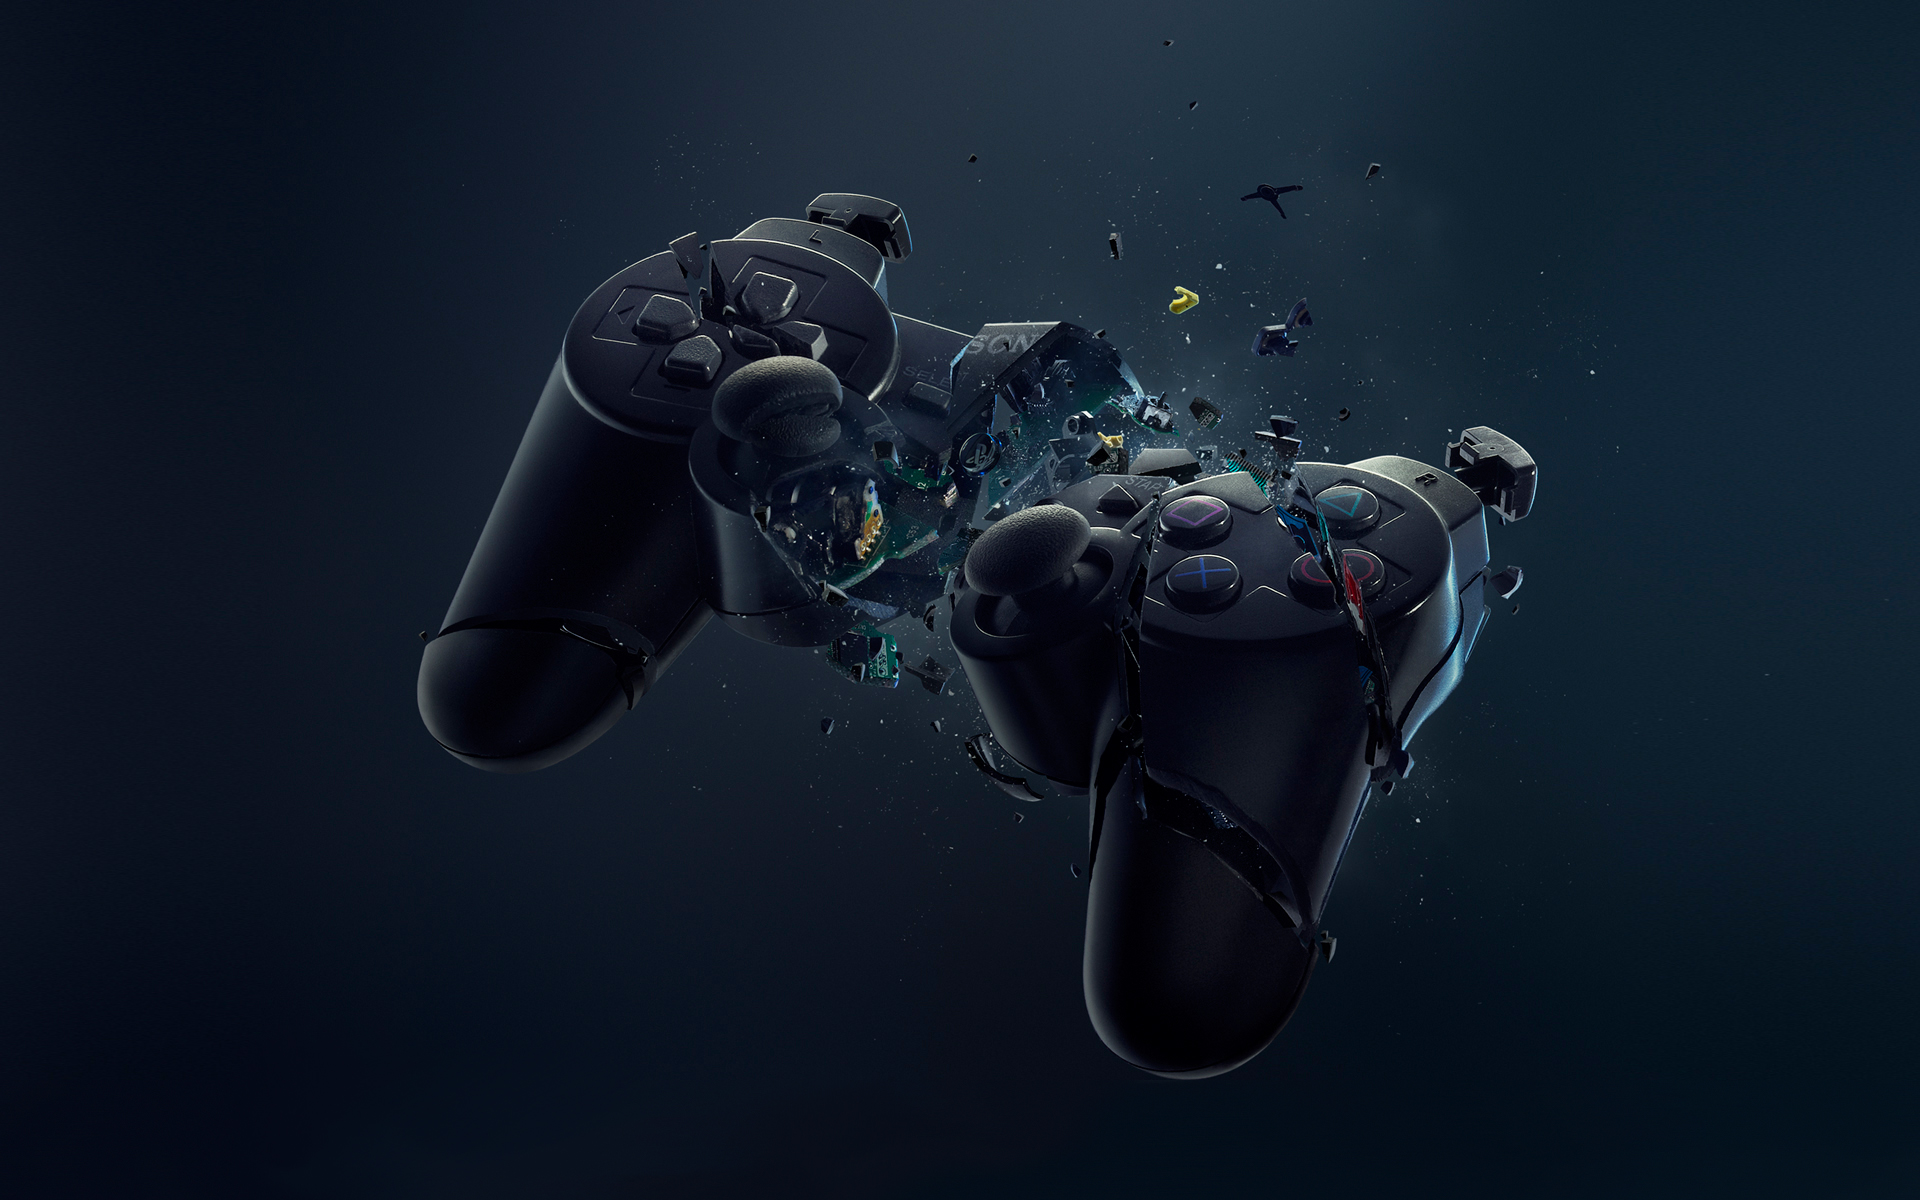 Ps3 Pad Explosion Wallpaper Myspace Background